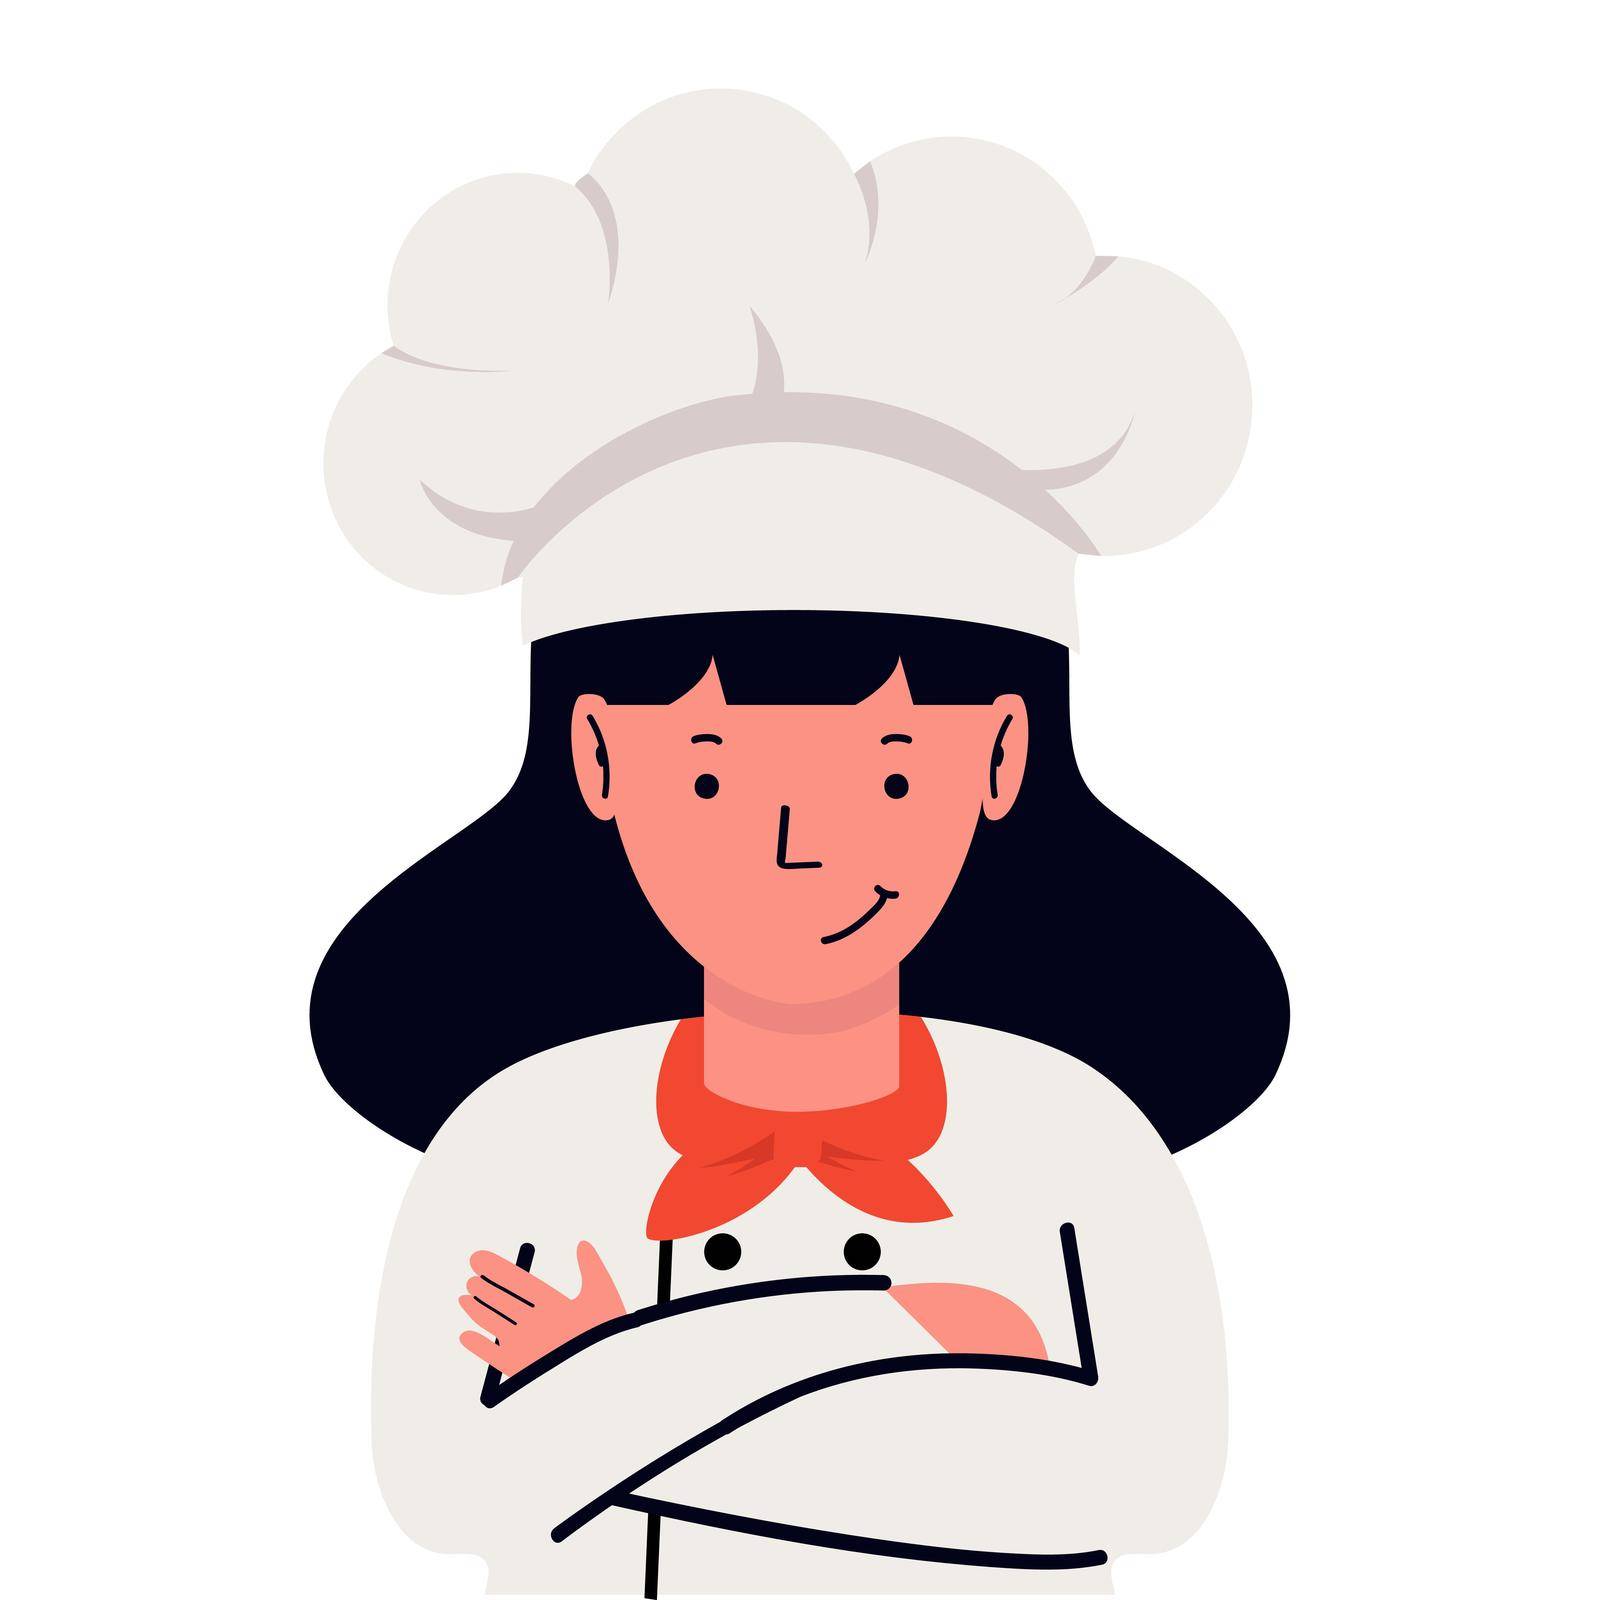 Chef cook smiling Vector cartoon  by focus_bell